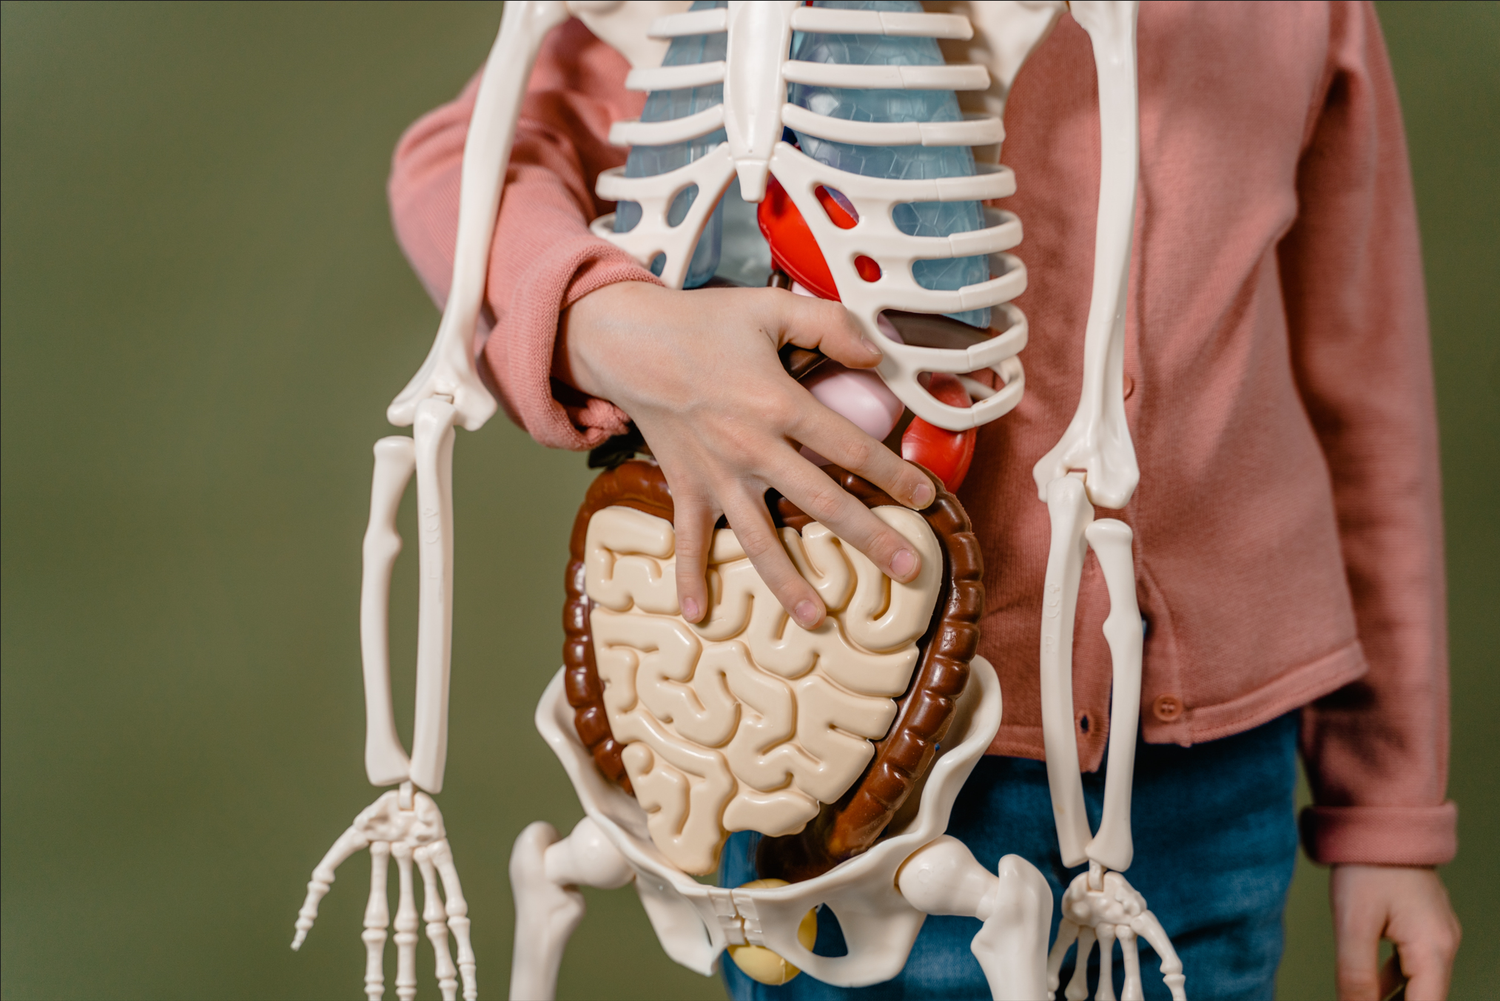 A young girl holding a plastic skeleton with plastic organs